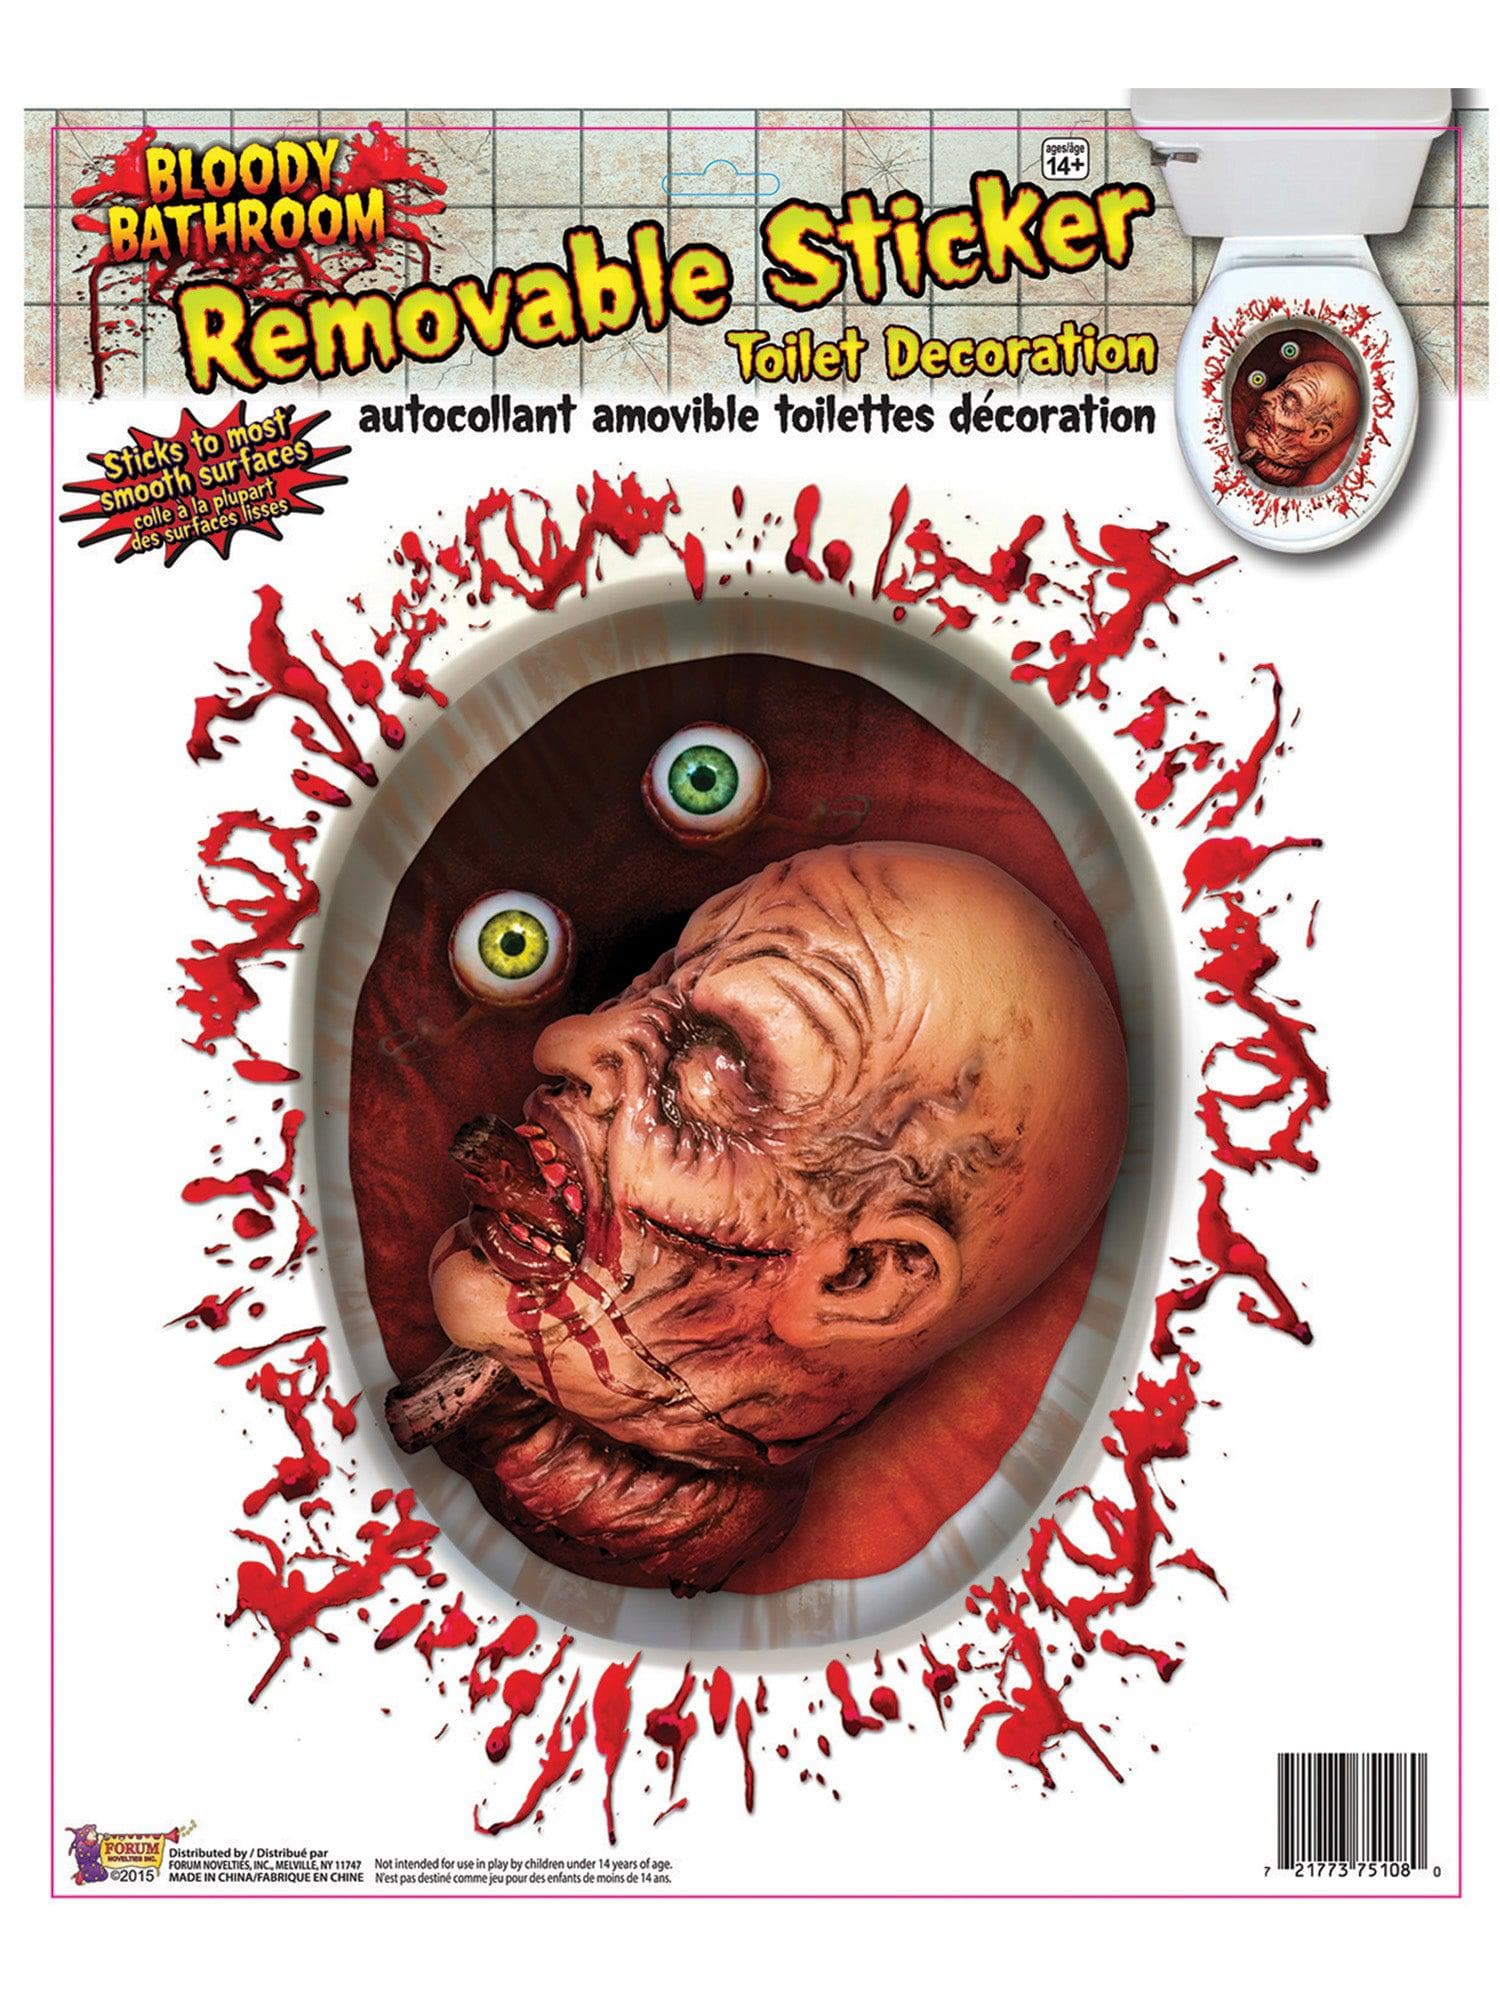 Bloody Monster Removable Sticker Toilet Seat Decoration - costumes.com